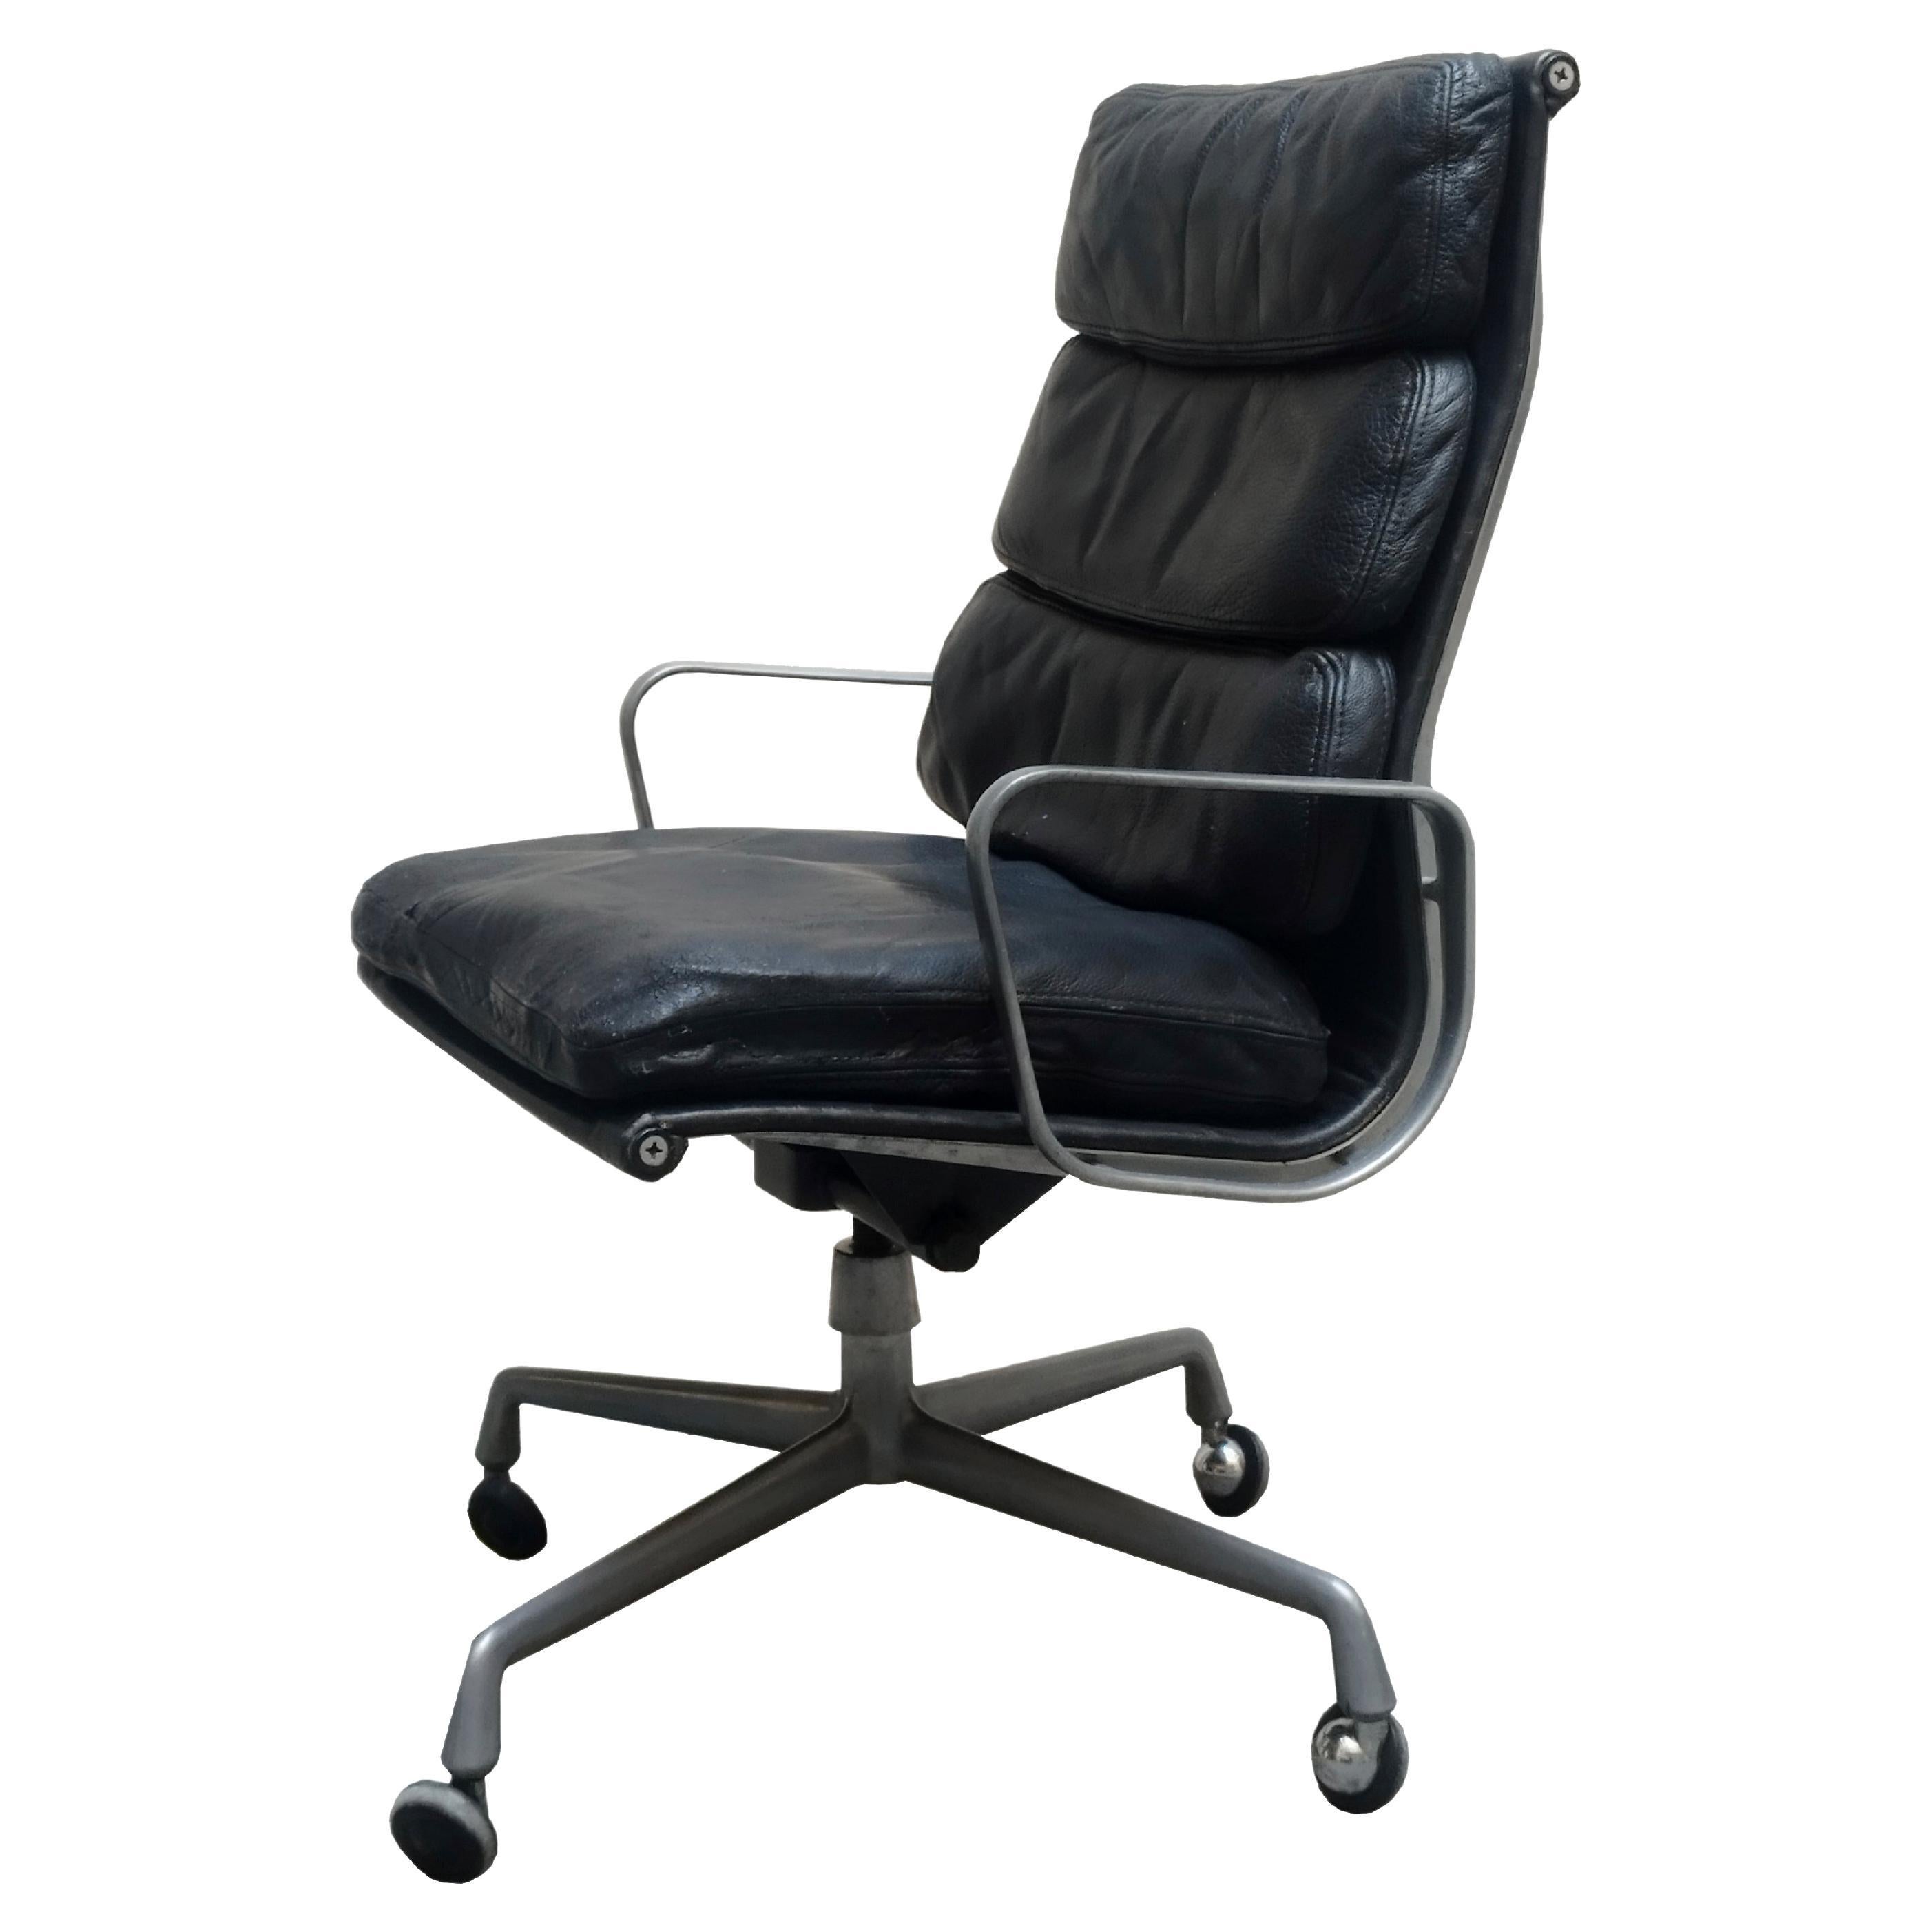 Charles & Ray Eames for Herman Miller Soft Pad Aluminum Leather Desk Chair, 1990 For Sale